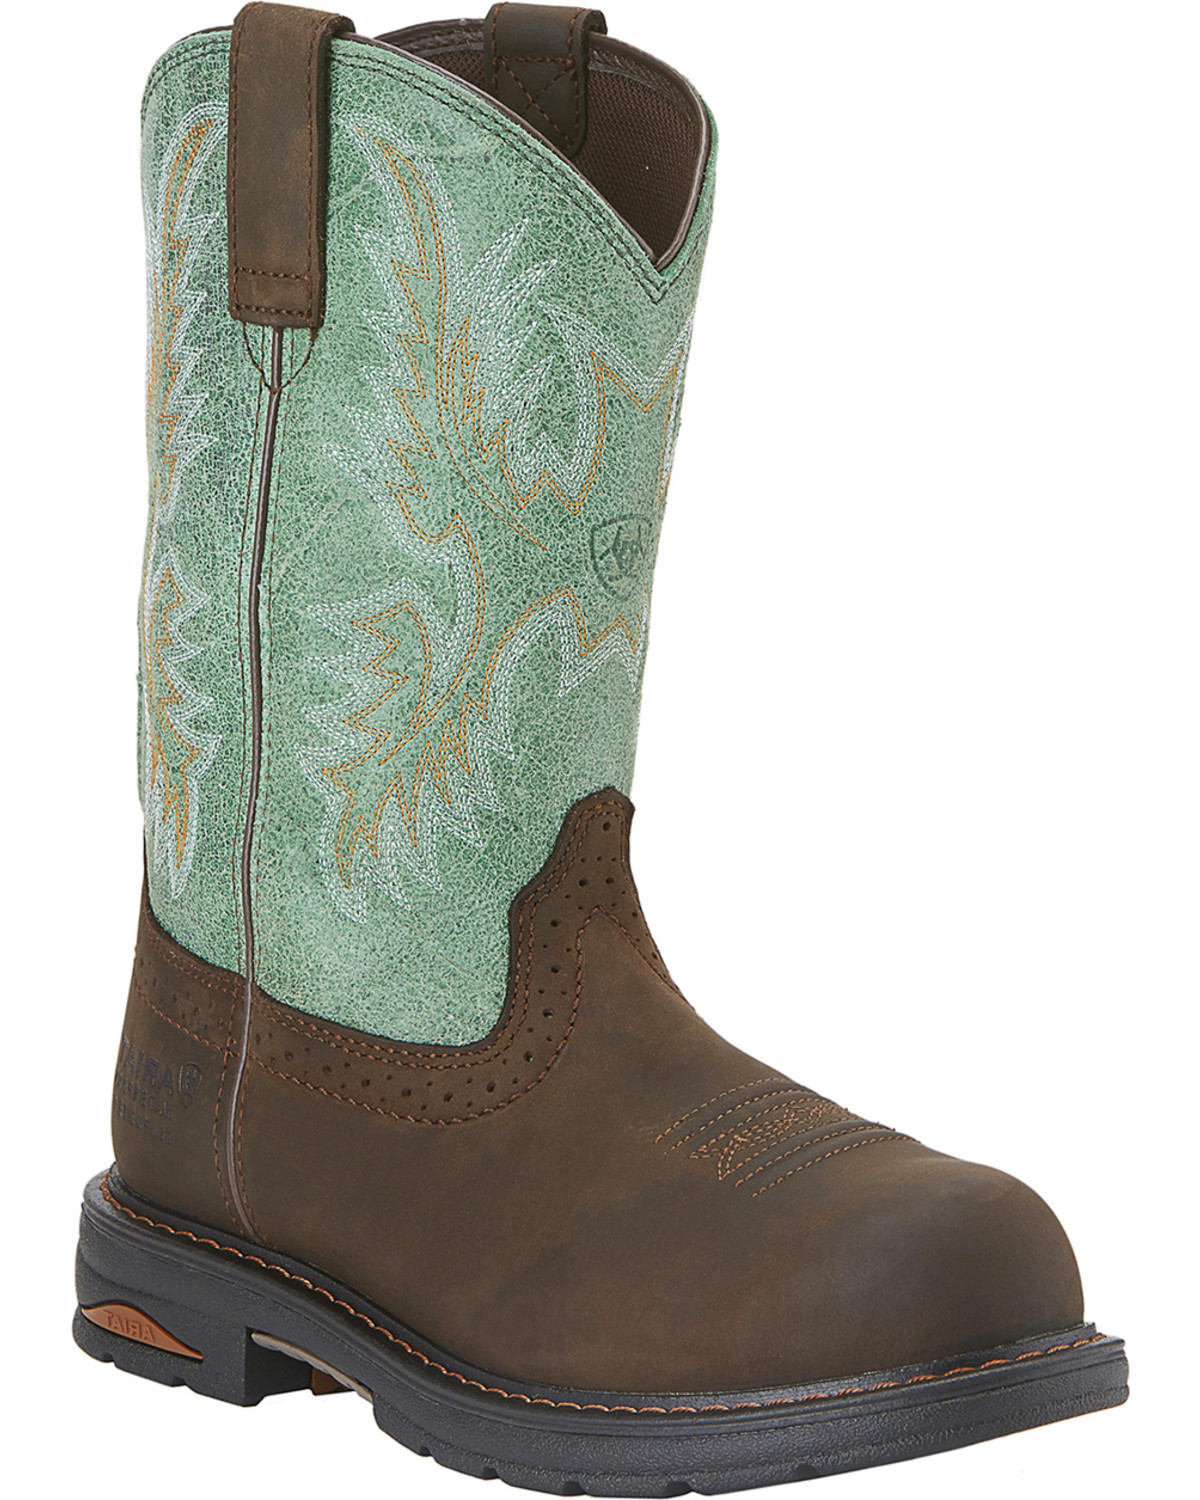 Ariat Waterproof Tracey Pull On Work Boots - Composite Toe